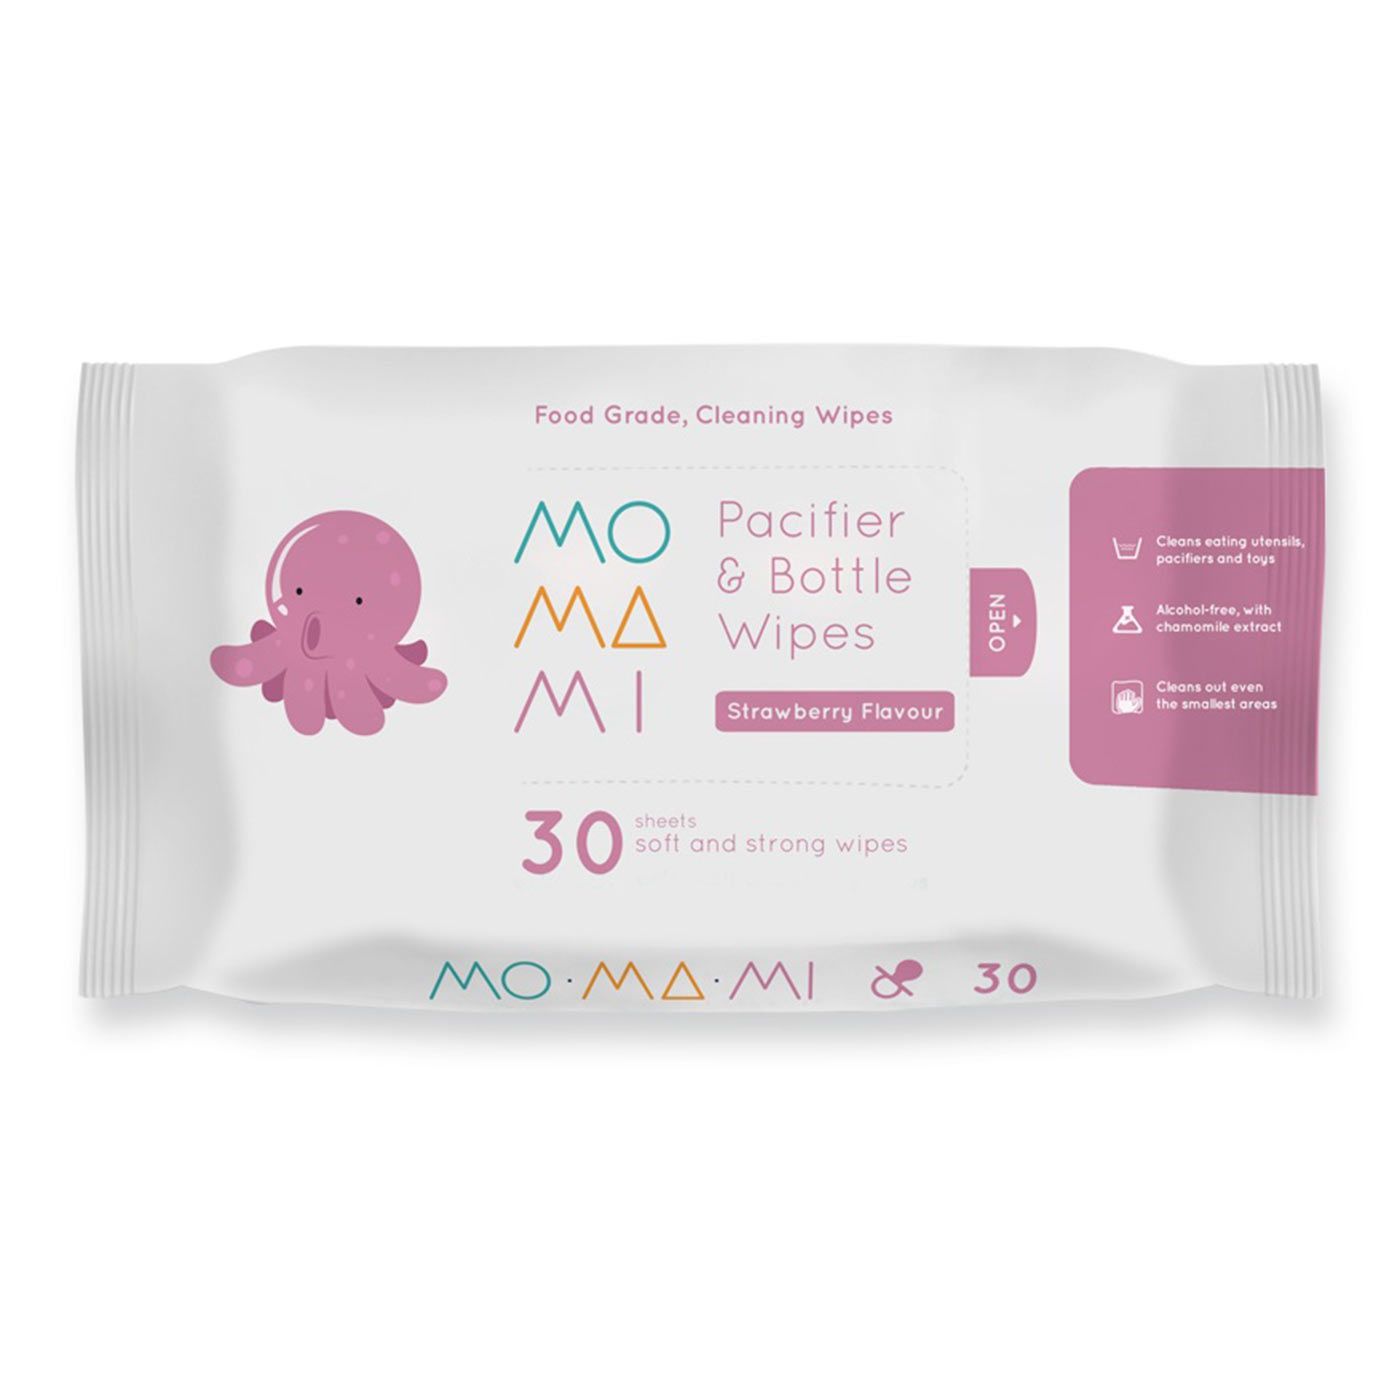 Momami Pacifier & Bottle Wipes 30 - 1